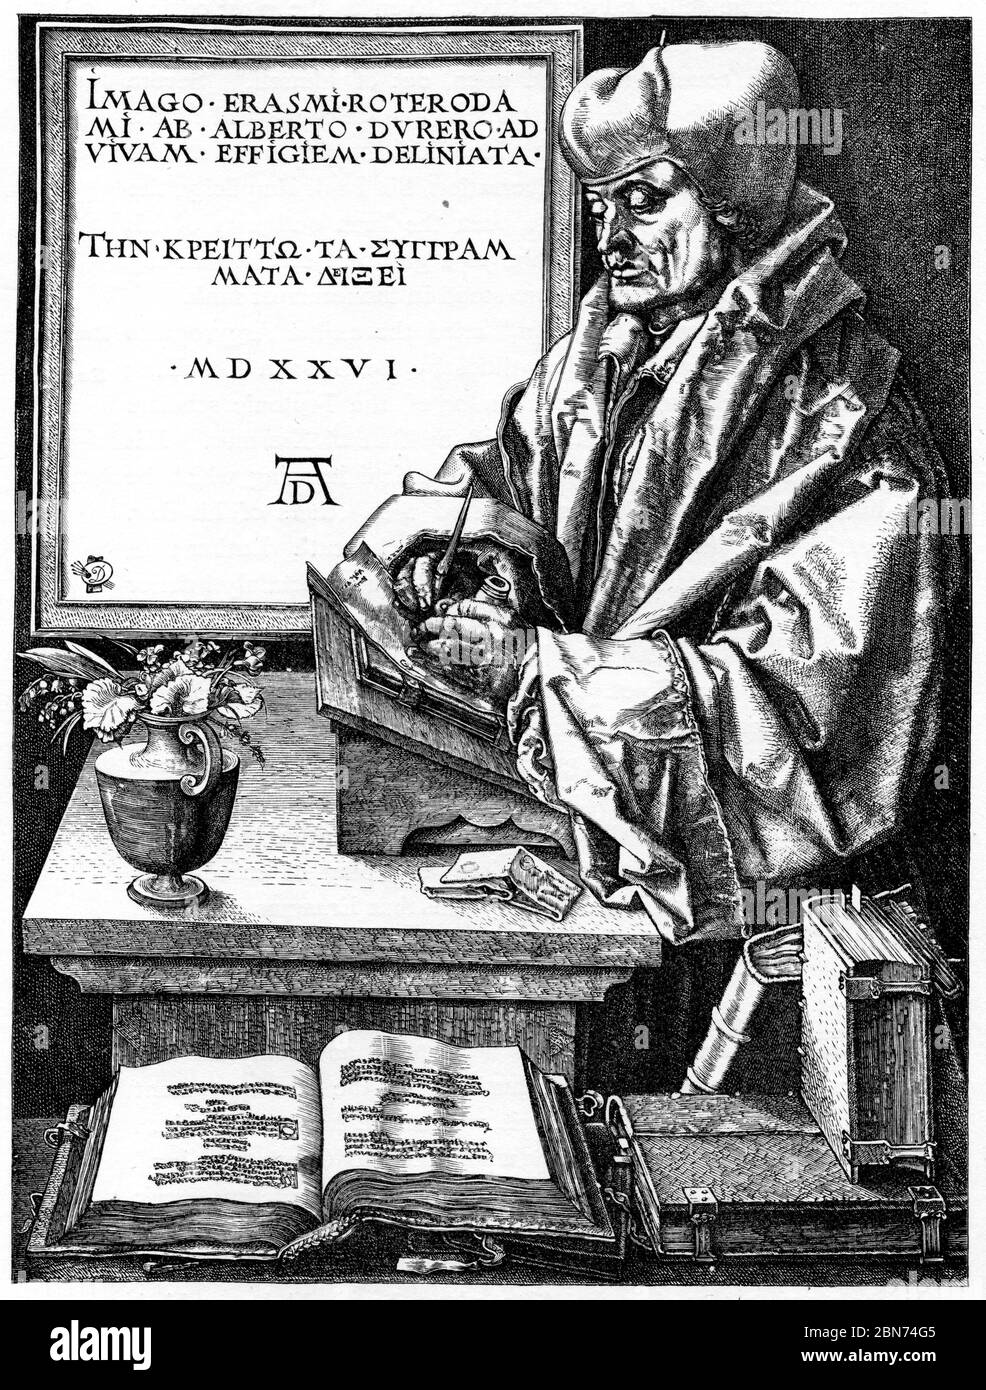 Portrait of Erasmus, 1526. By Albrecht Dürer (1471-1528). Desiderius Erasmus Roterodamus (1466-1536), known as Erasmus or Erasmus of Rotterdam, was a Dutch philosopher and Christian scholar who is considered to have been one of the greatest scholars of the northern Renaissance. Stock Photo